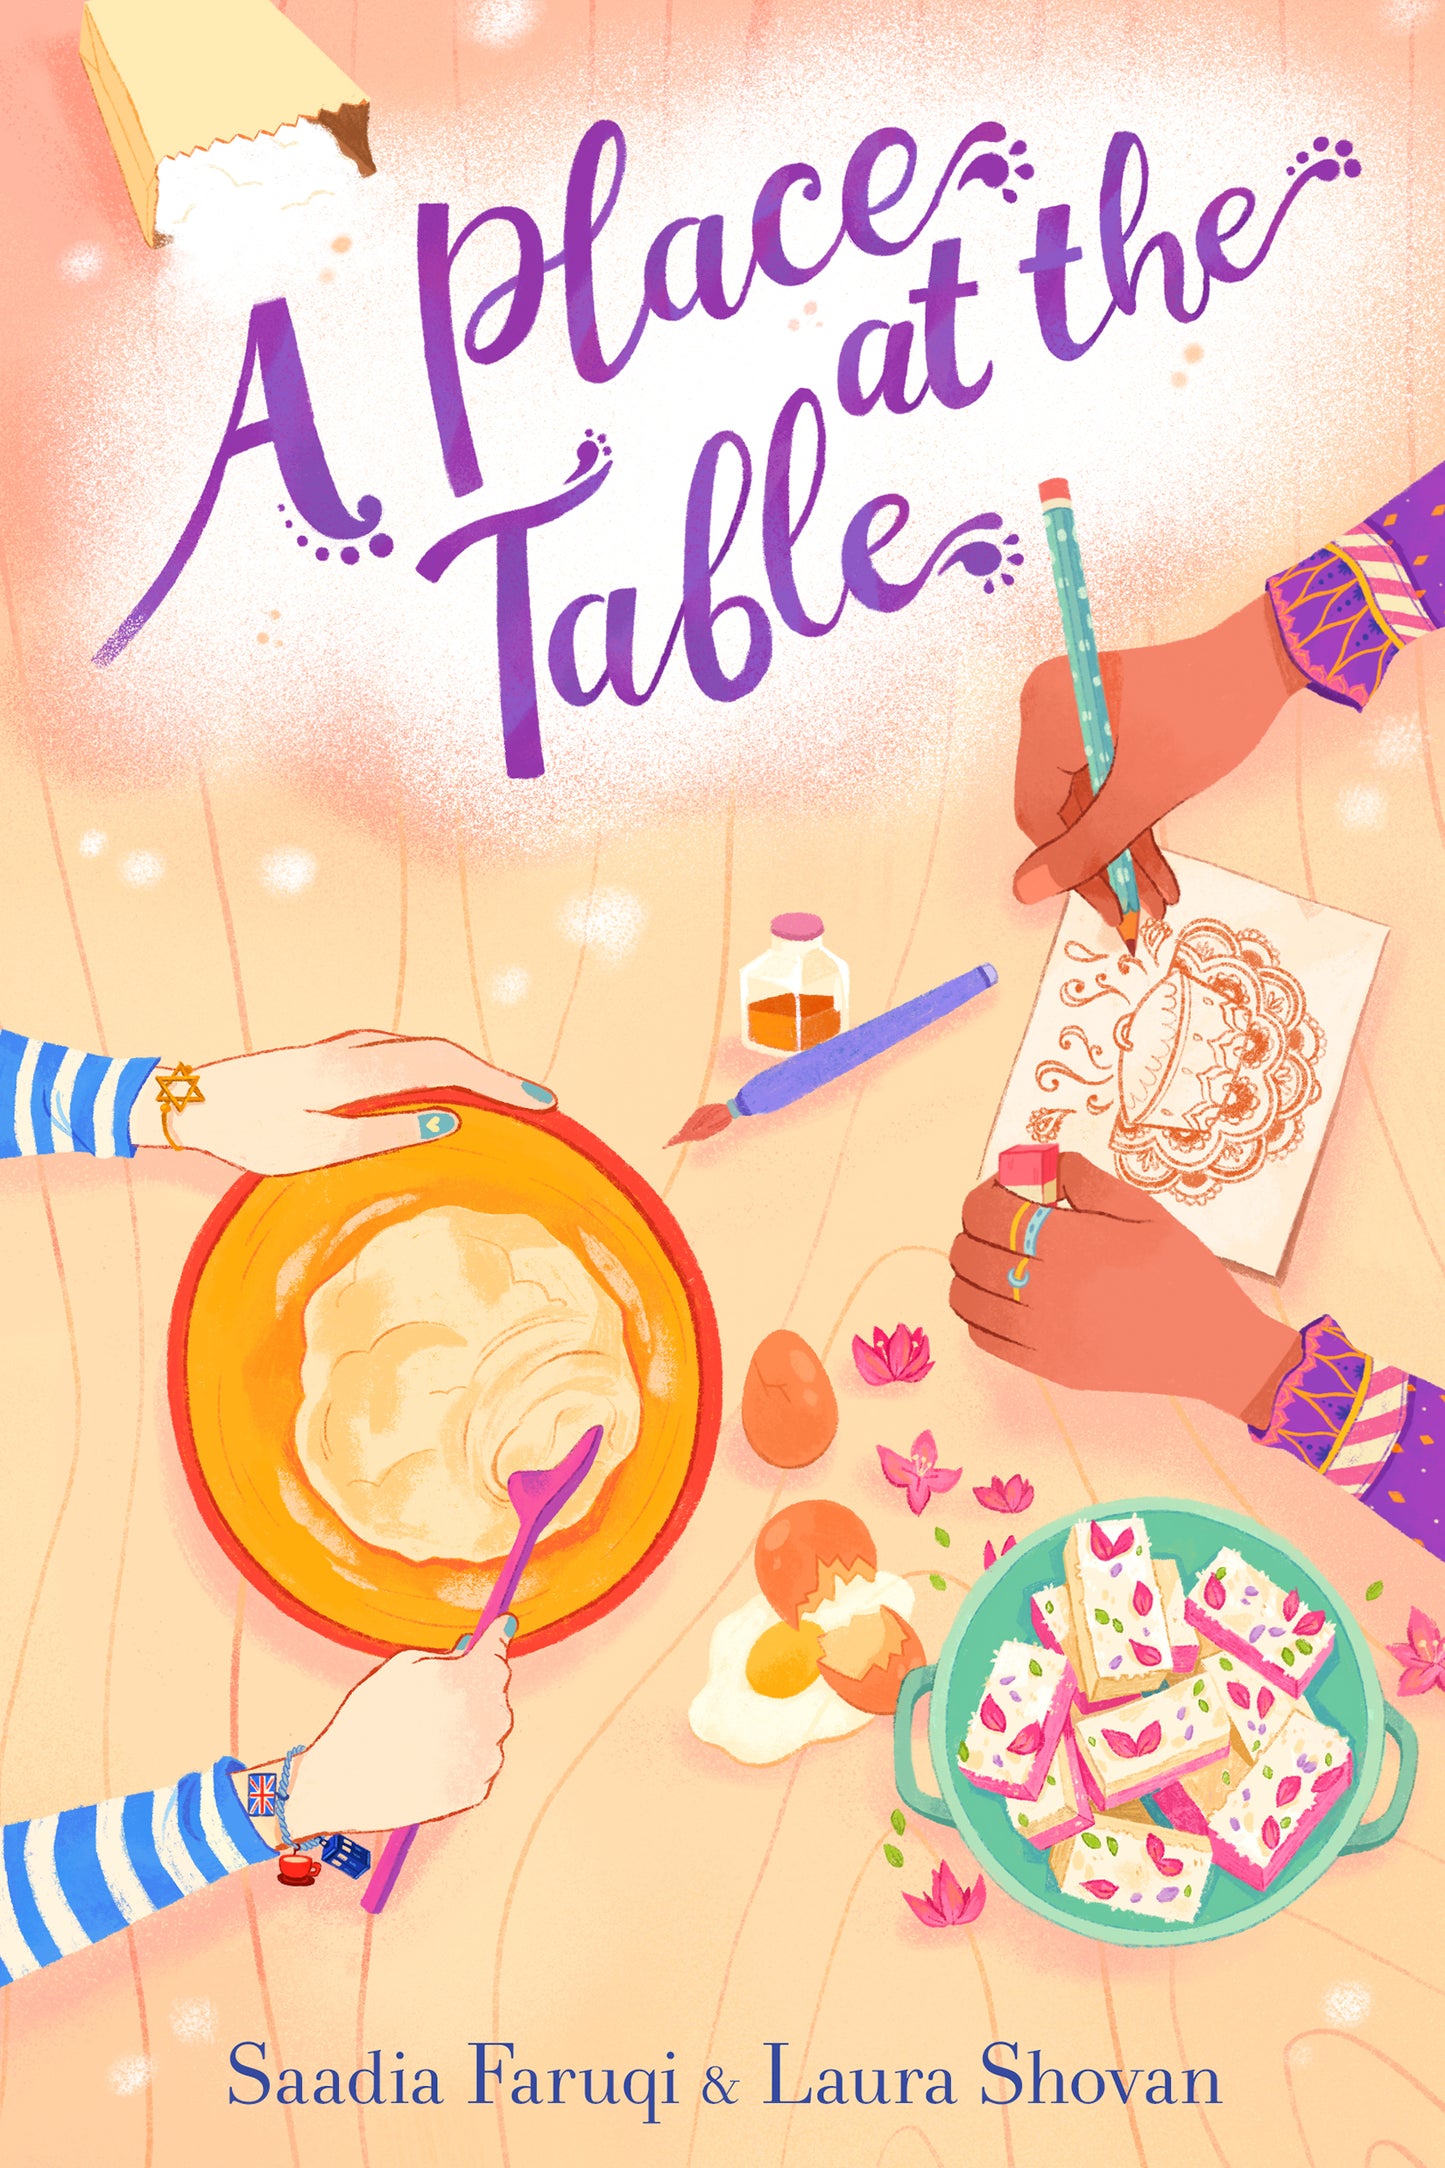 A Place at the Table - Saadia Faruqi and Laura Shovan